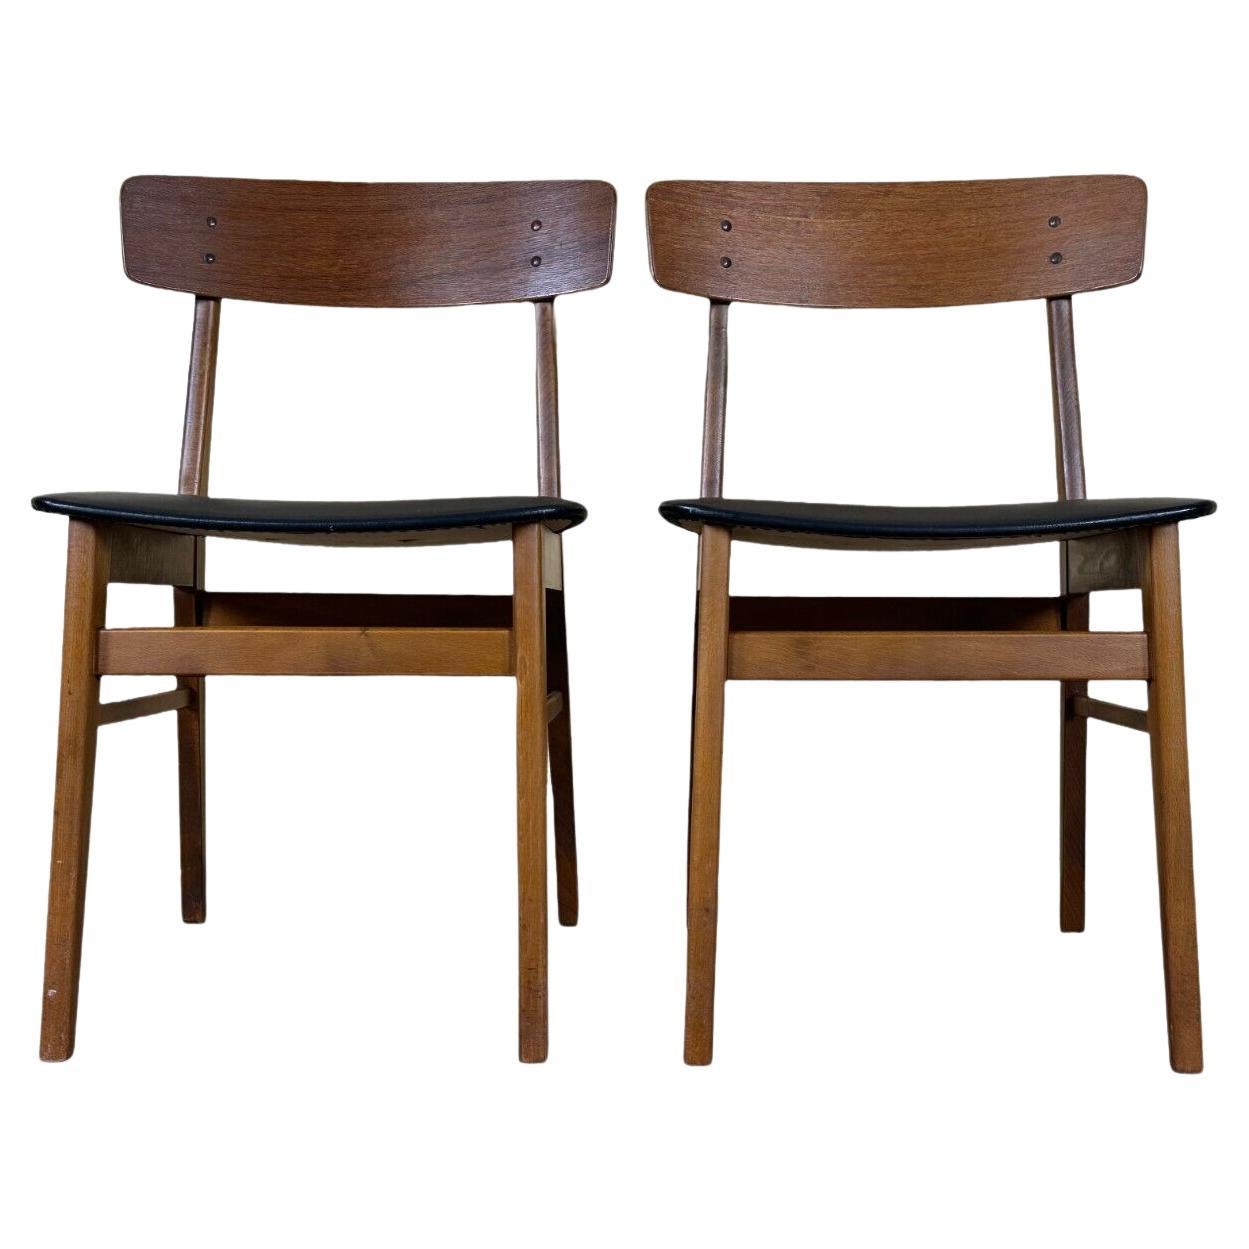 2x 60s 70s teak dining chair by Farstrup Møbler Made in Denmark For Sale